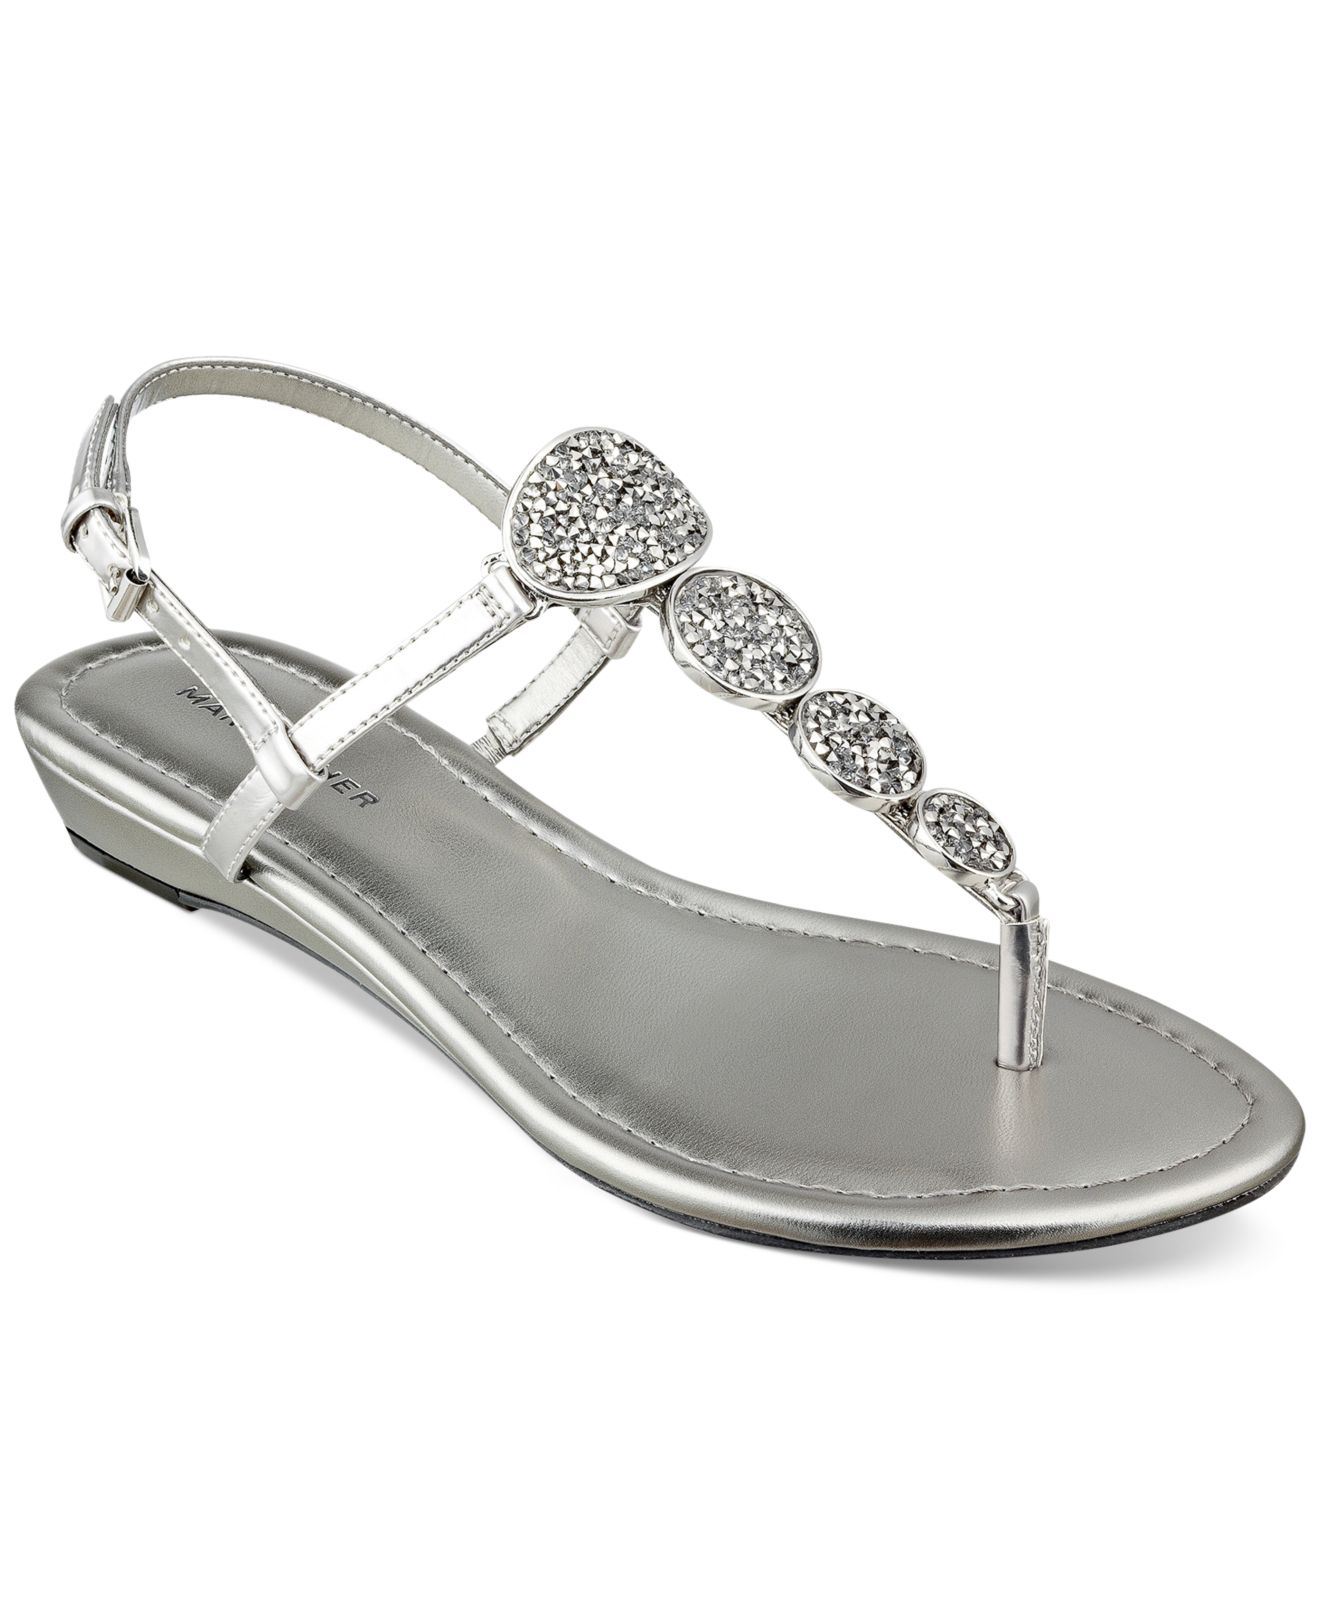 marc fisher silver sandals